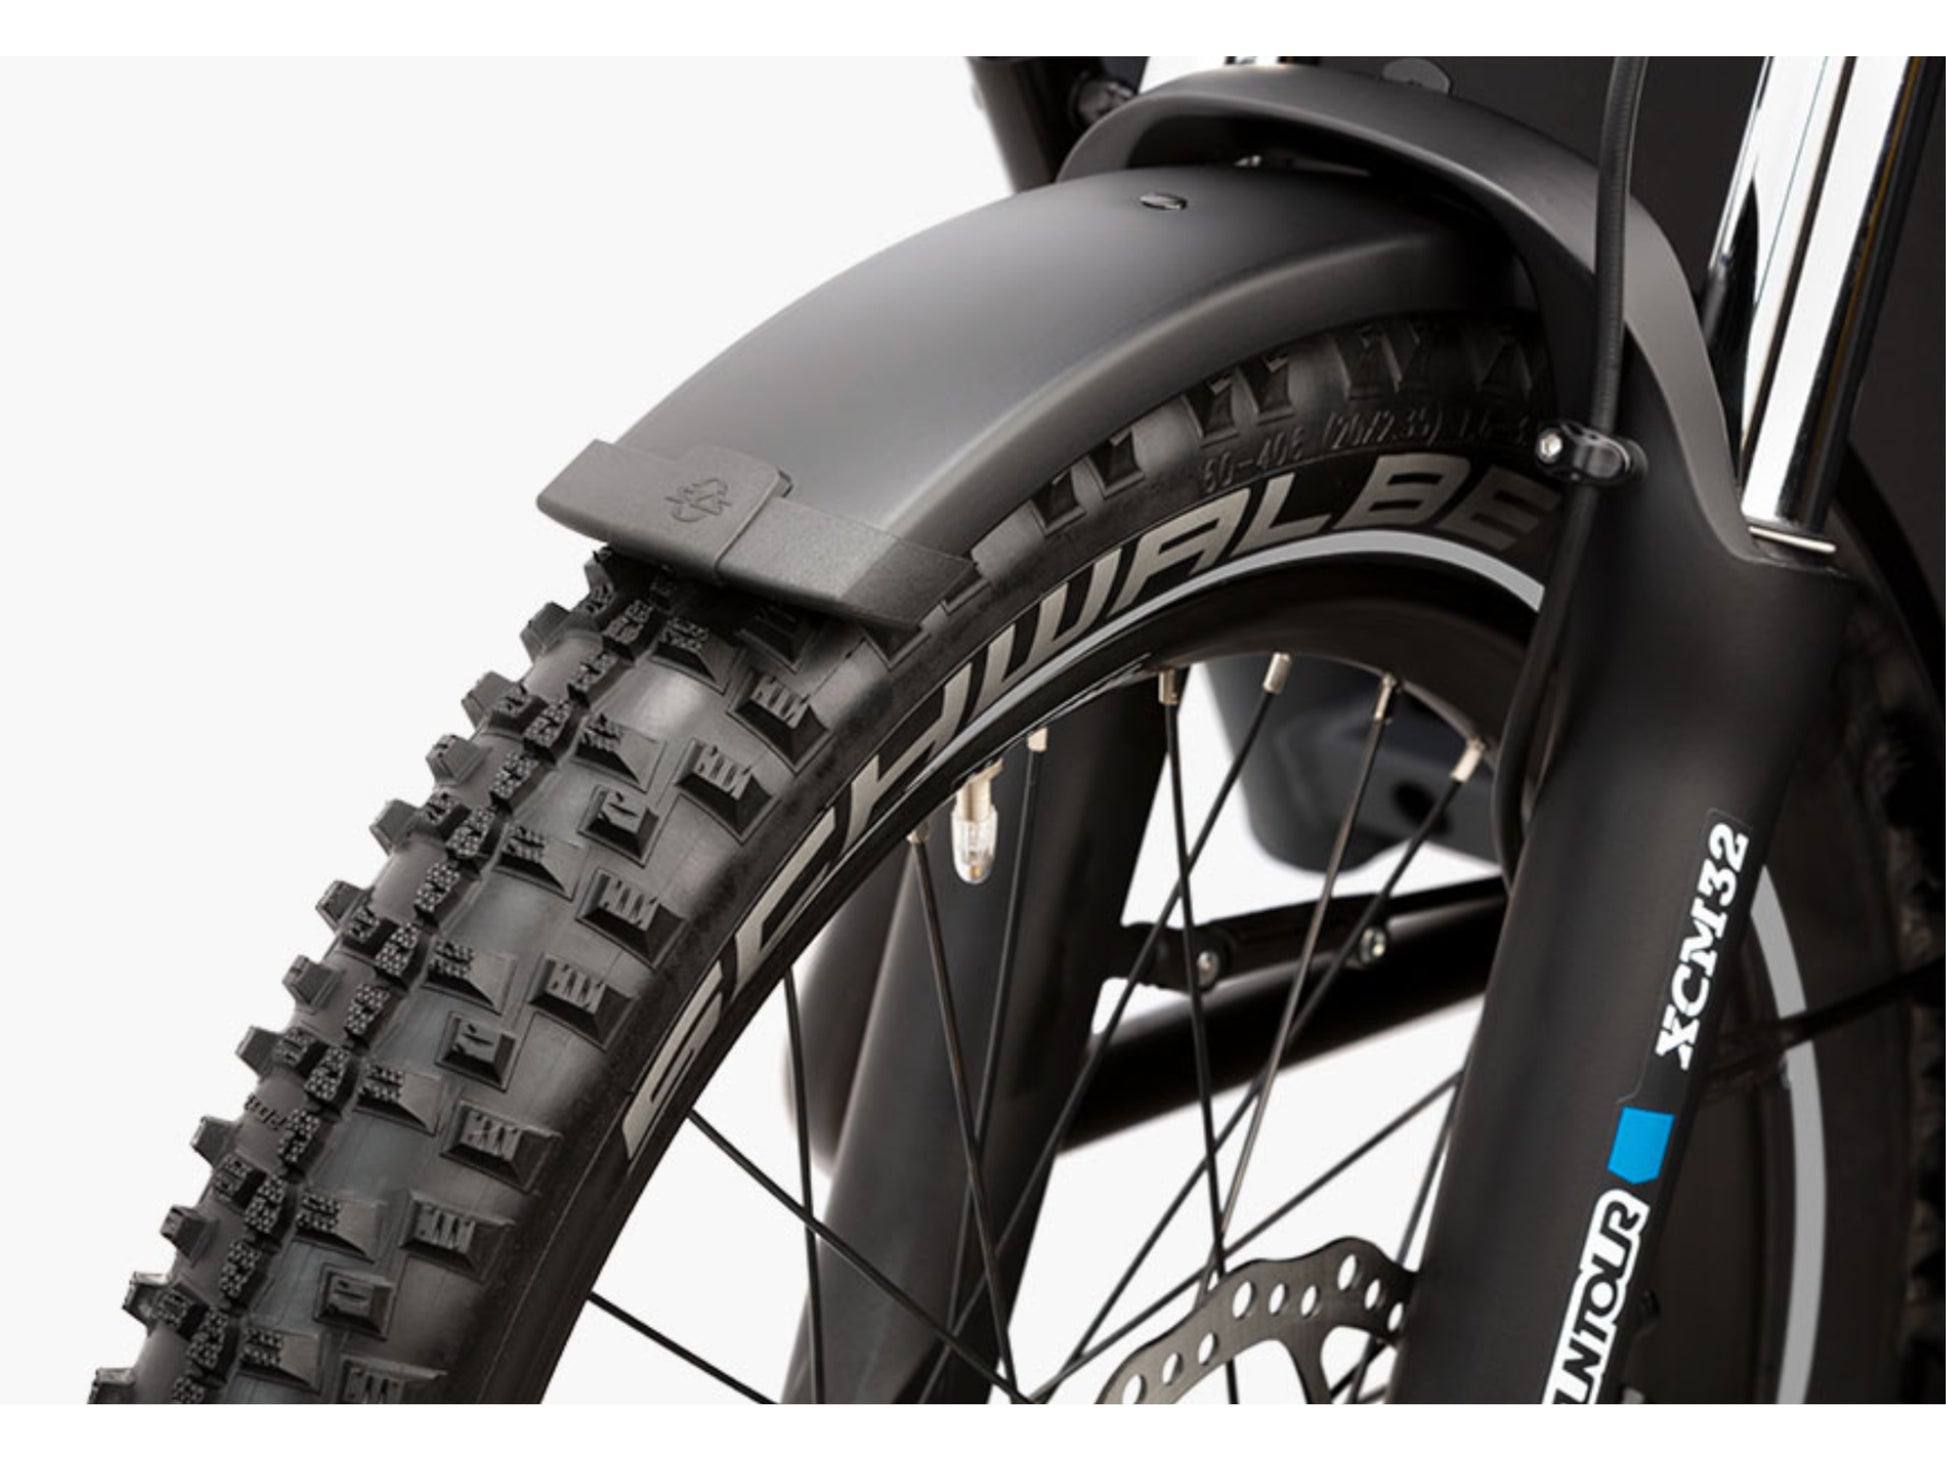 Riese & Muller Load4 60 Touring eMtb full suspension close up gx option